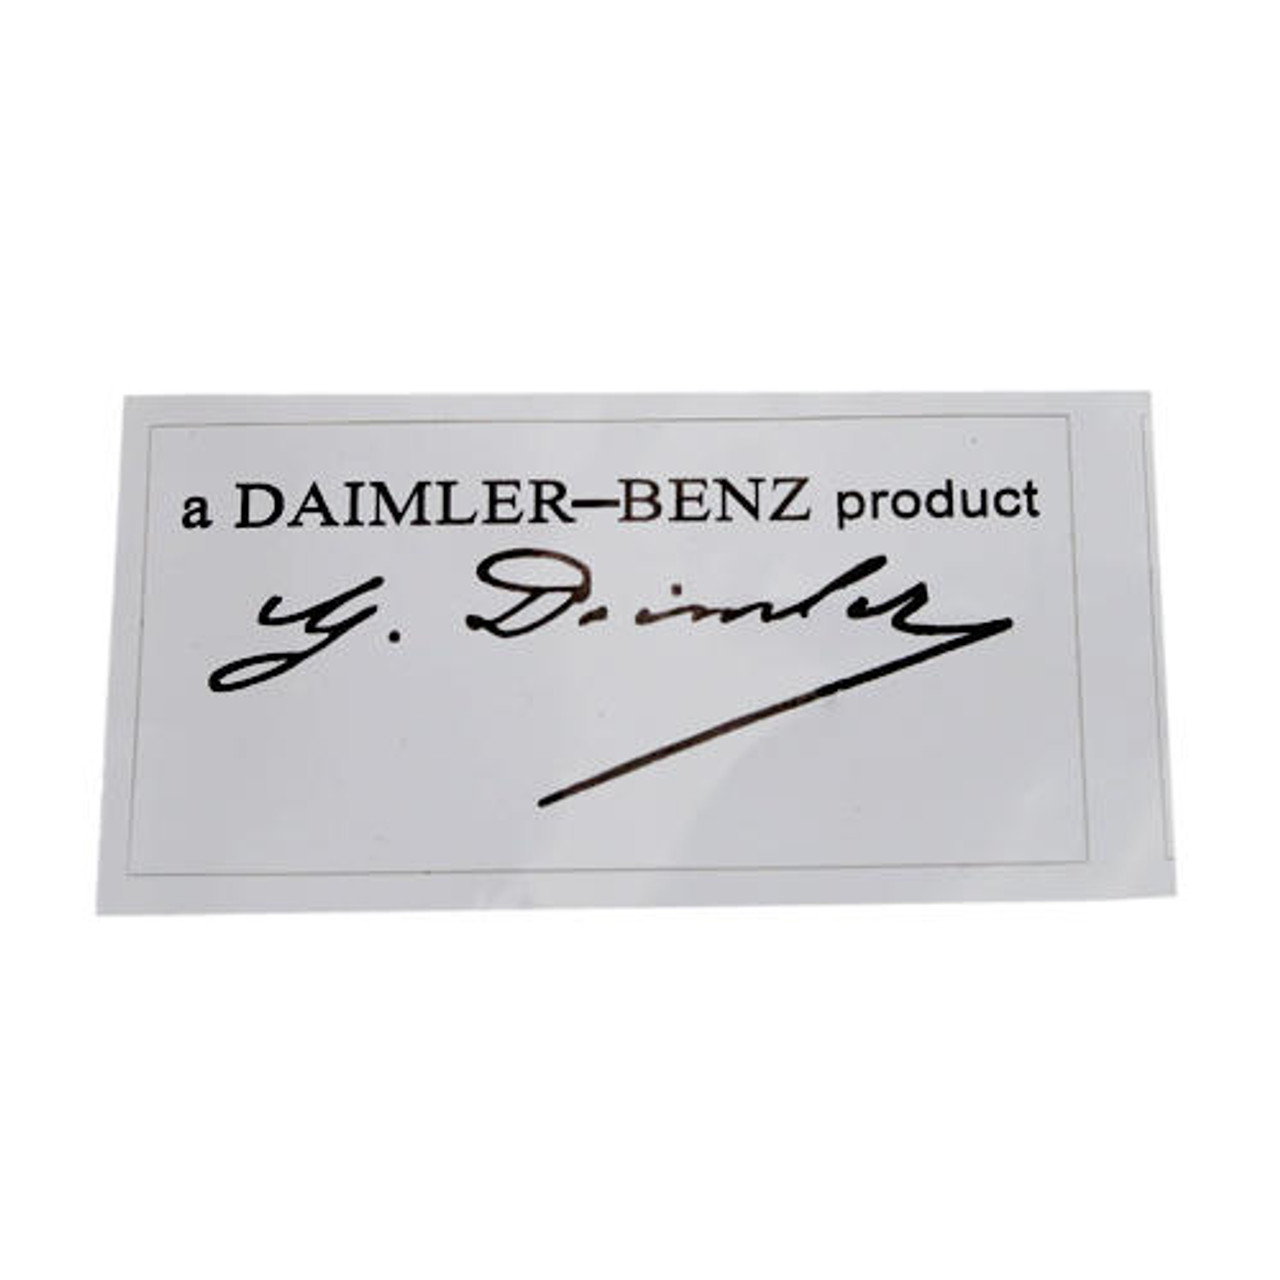 Mercedes-Benz Windshield sticker for Mercedes classic cars - The